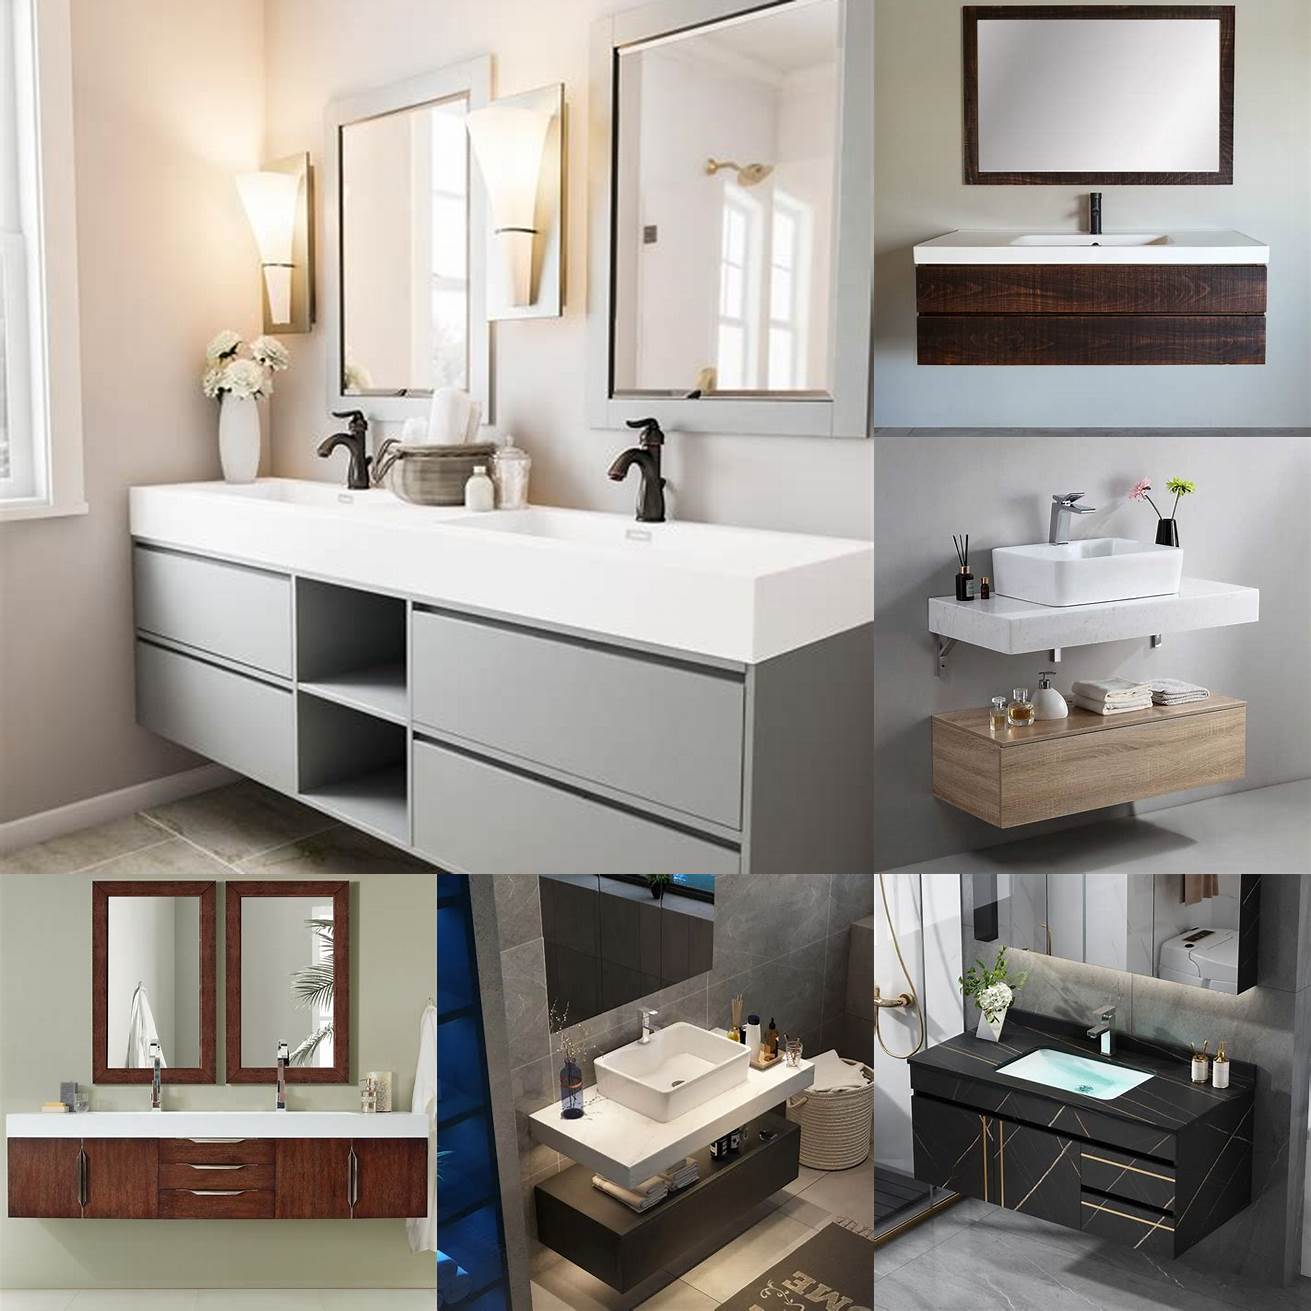 Floating vanities Floating vanities are mounted to the wall and can give your bathroom a modern streamlined look